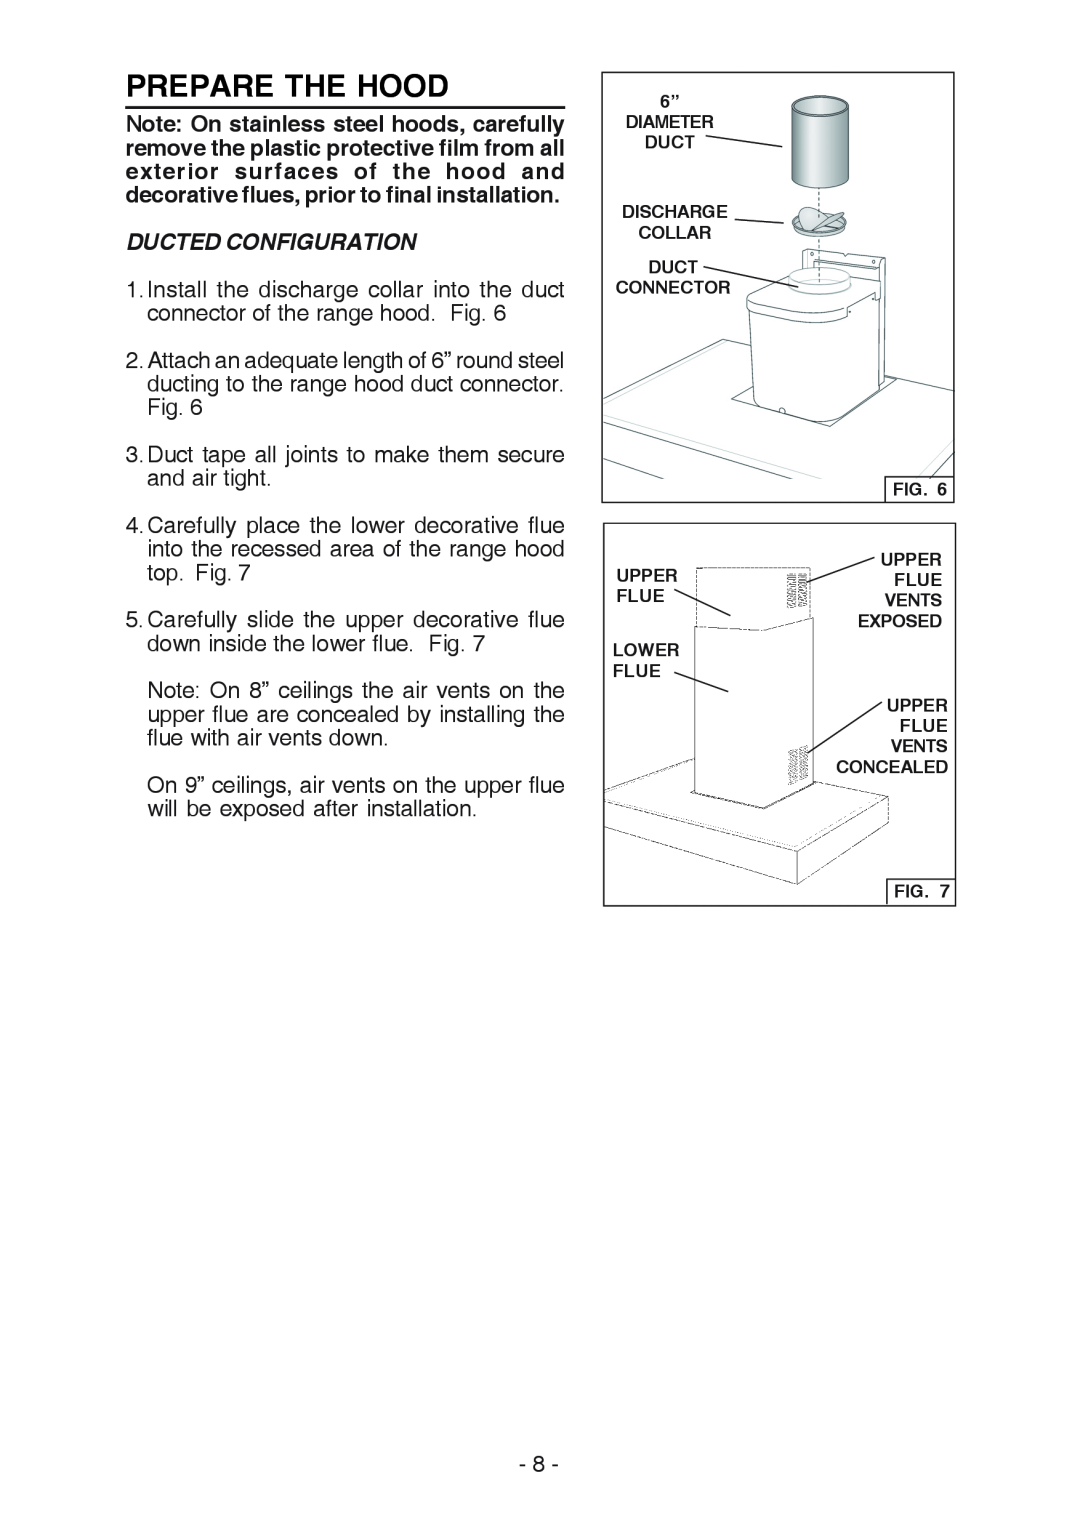 Broan RM533604 manual Ducted Configuration, Prepare The Hood 